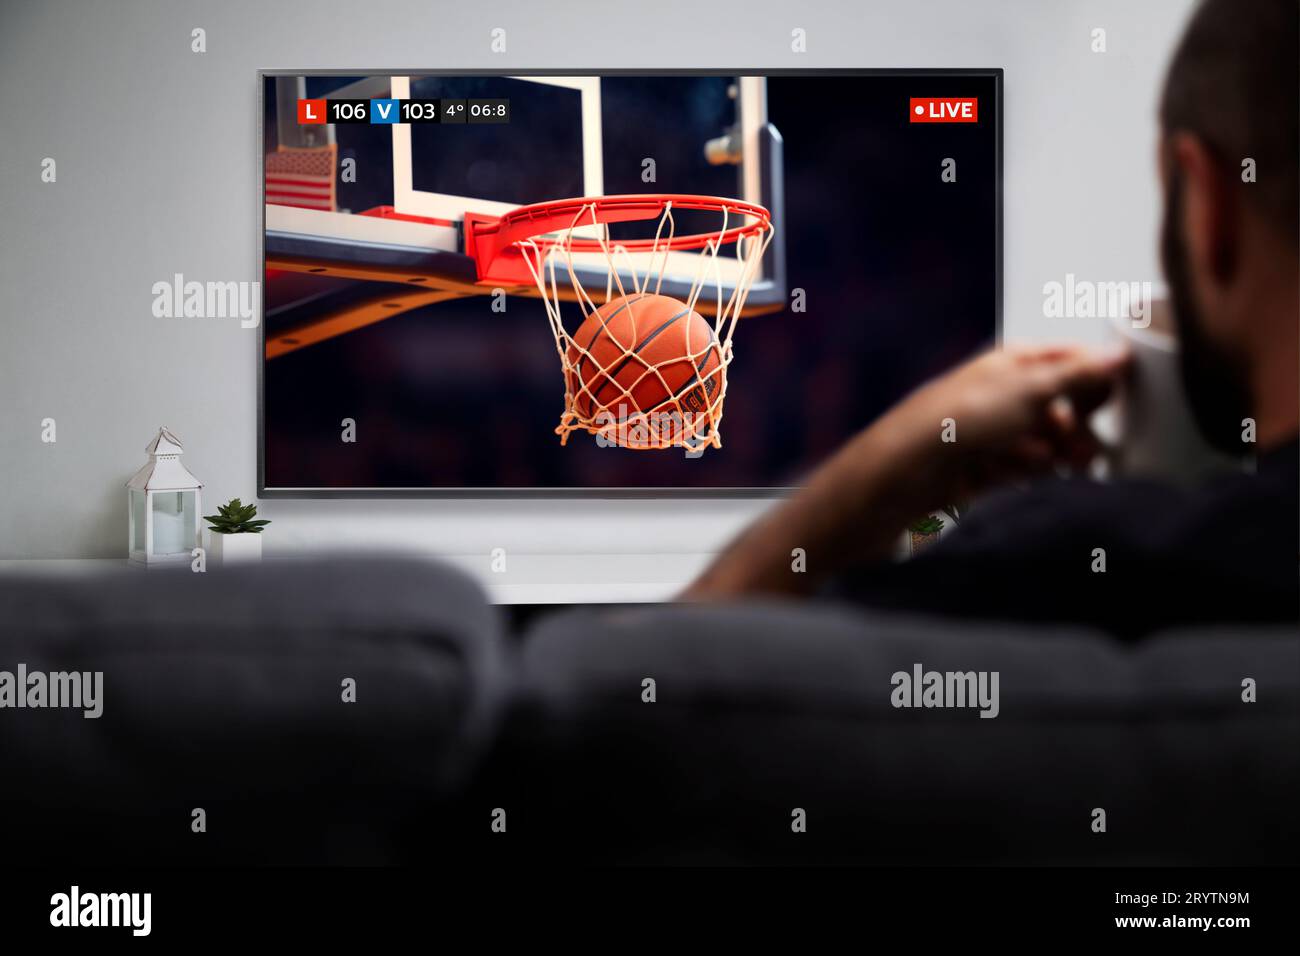 Man watching basketball match on smart TV while drinks coffee. Image of the  ball entering in the hoop. Live TV transmission Stock Photo - Alamy